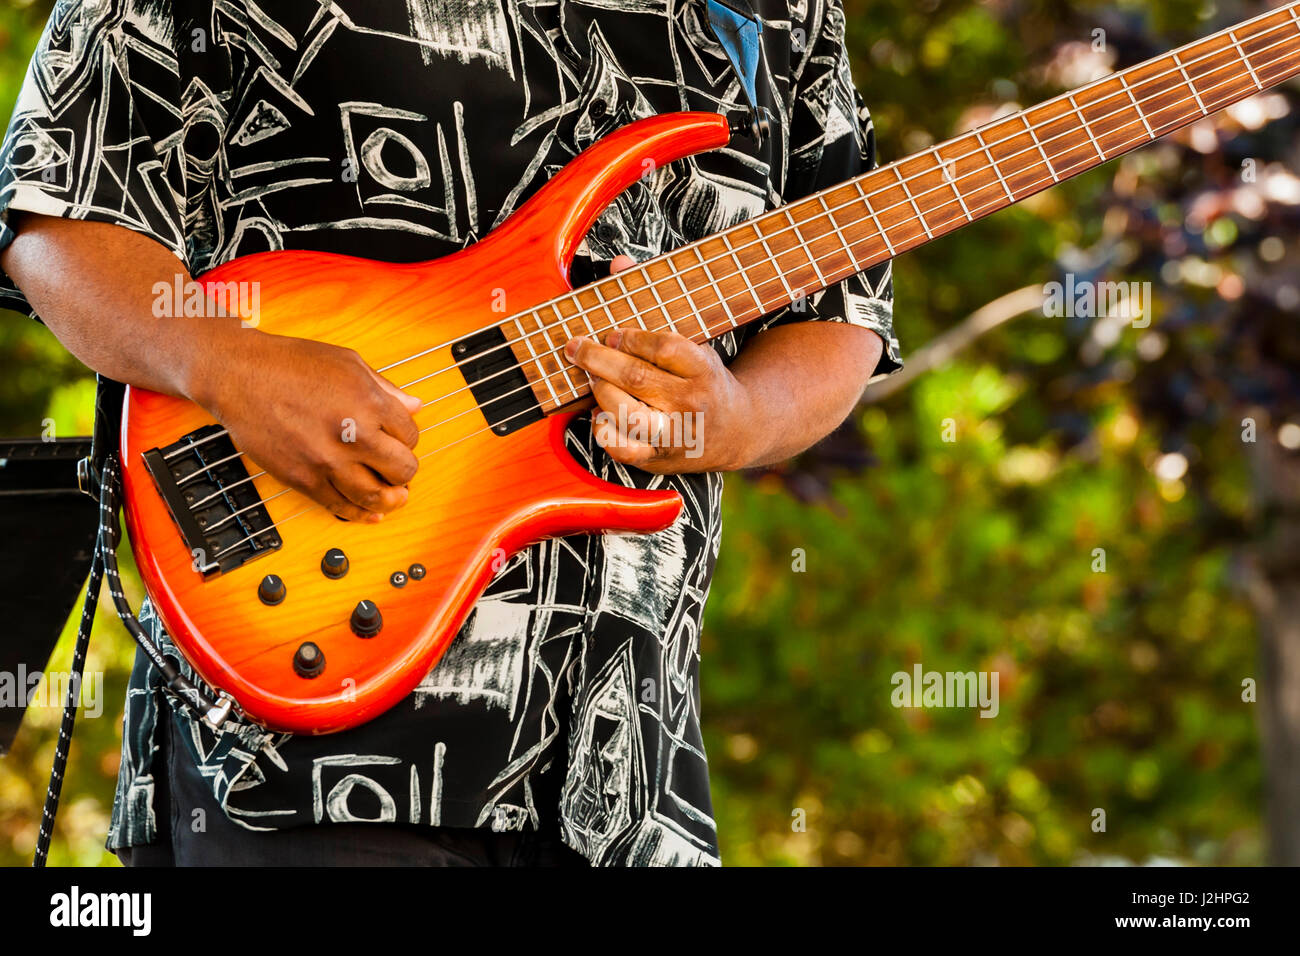 USA, Washington, Woodinville. Bass player takes a solo at an outdoor event. Stock Photo